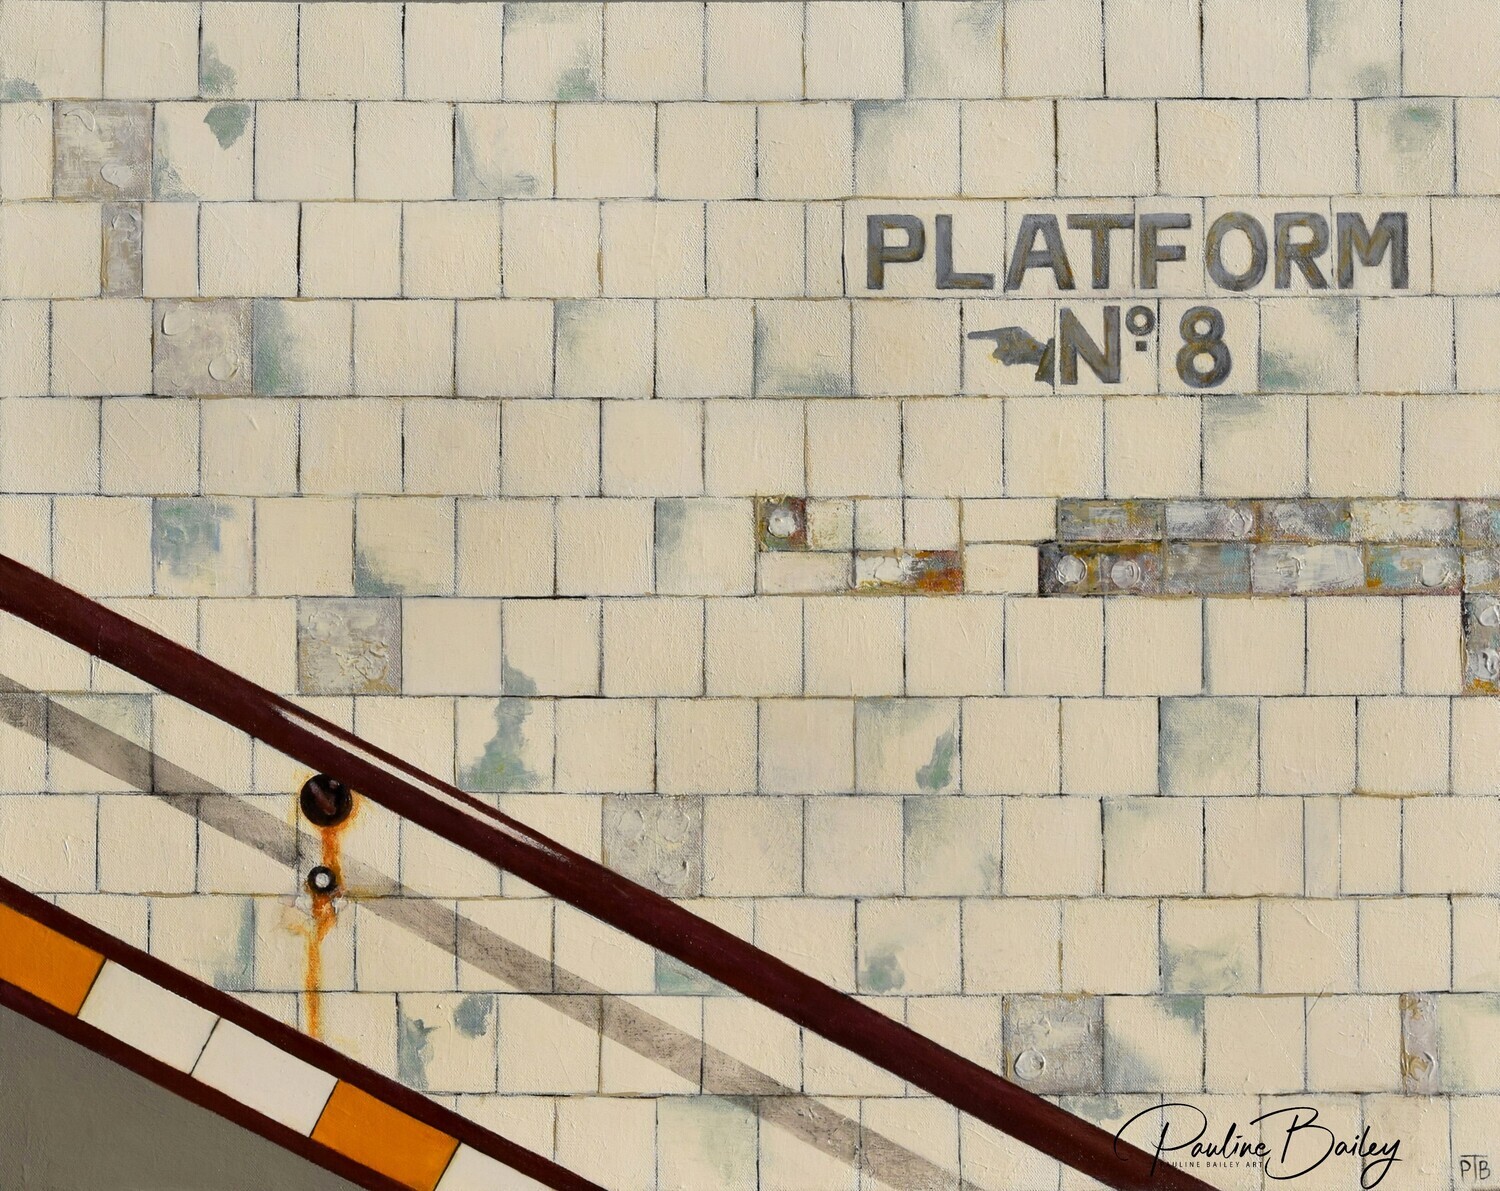 Original painting - Subway Platform 8 
*On display at the Criterion Hotel, Sale (payment and pickup options in description)